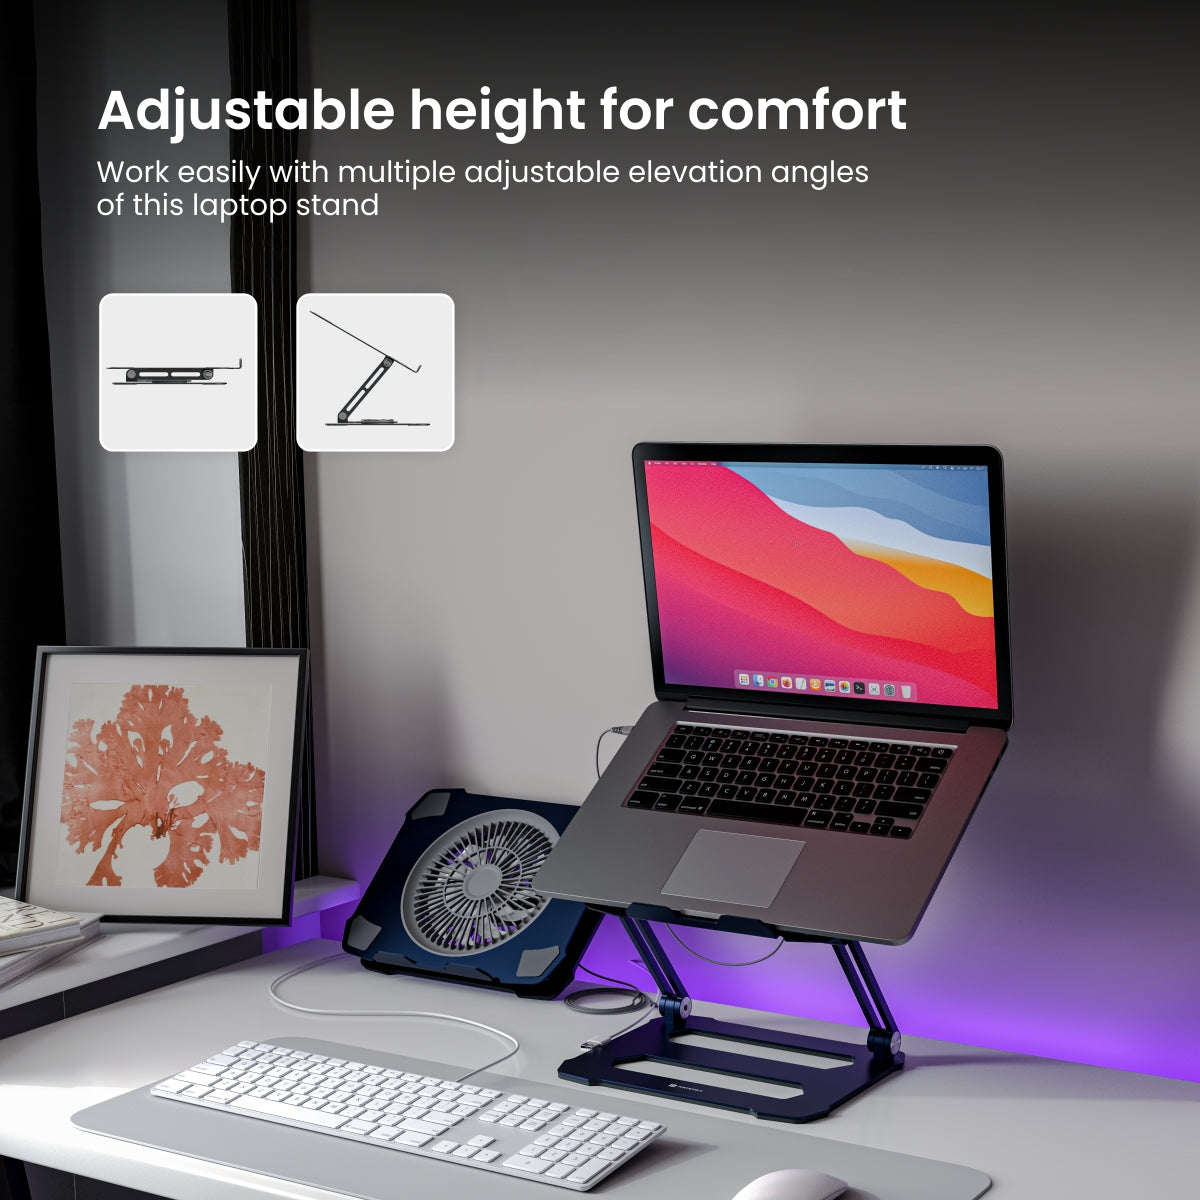 height adjustable laptop stand from portronics. Blue